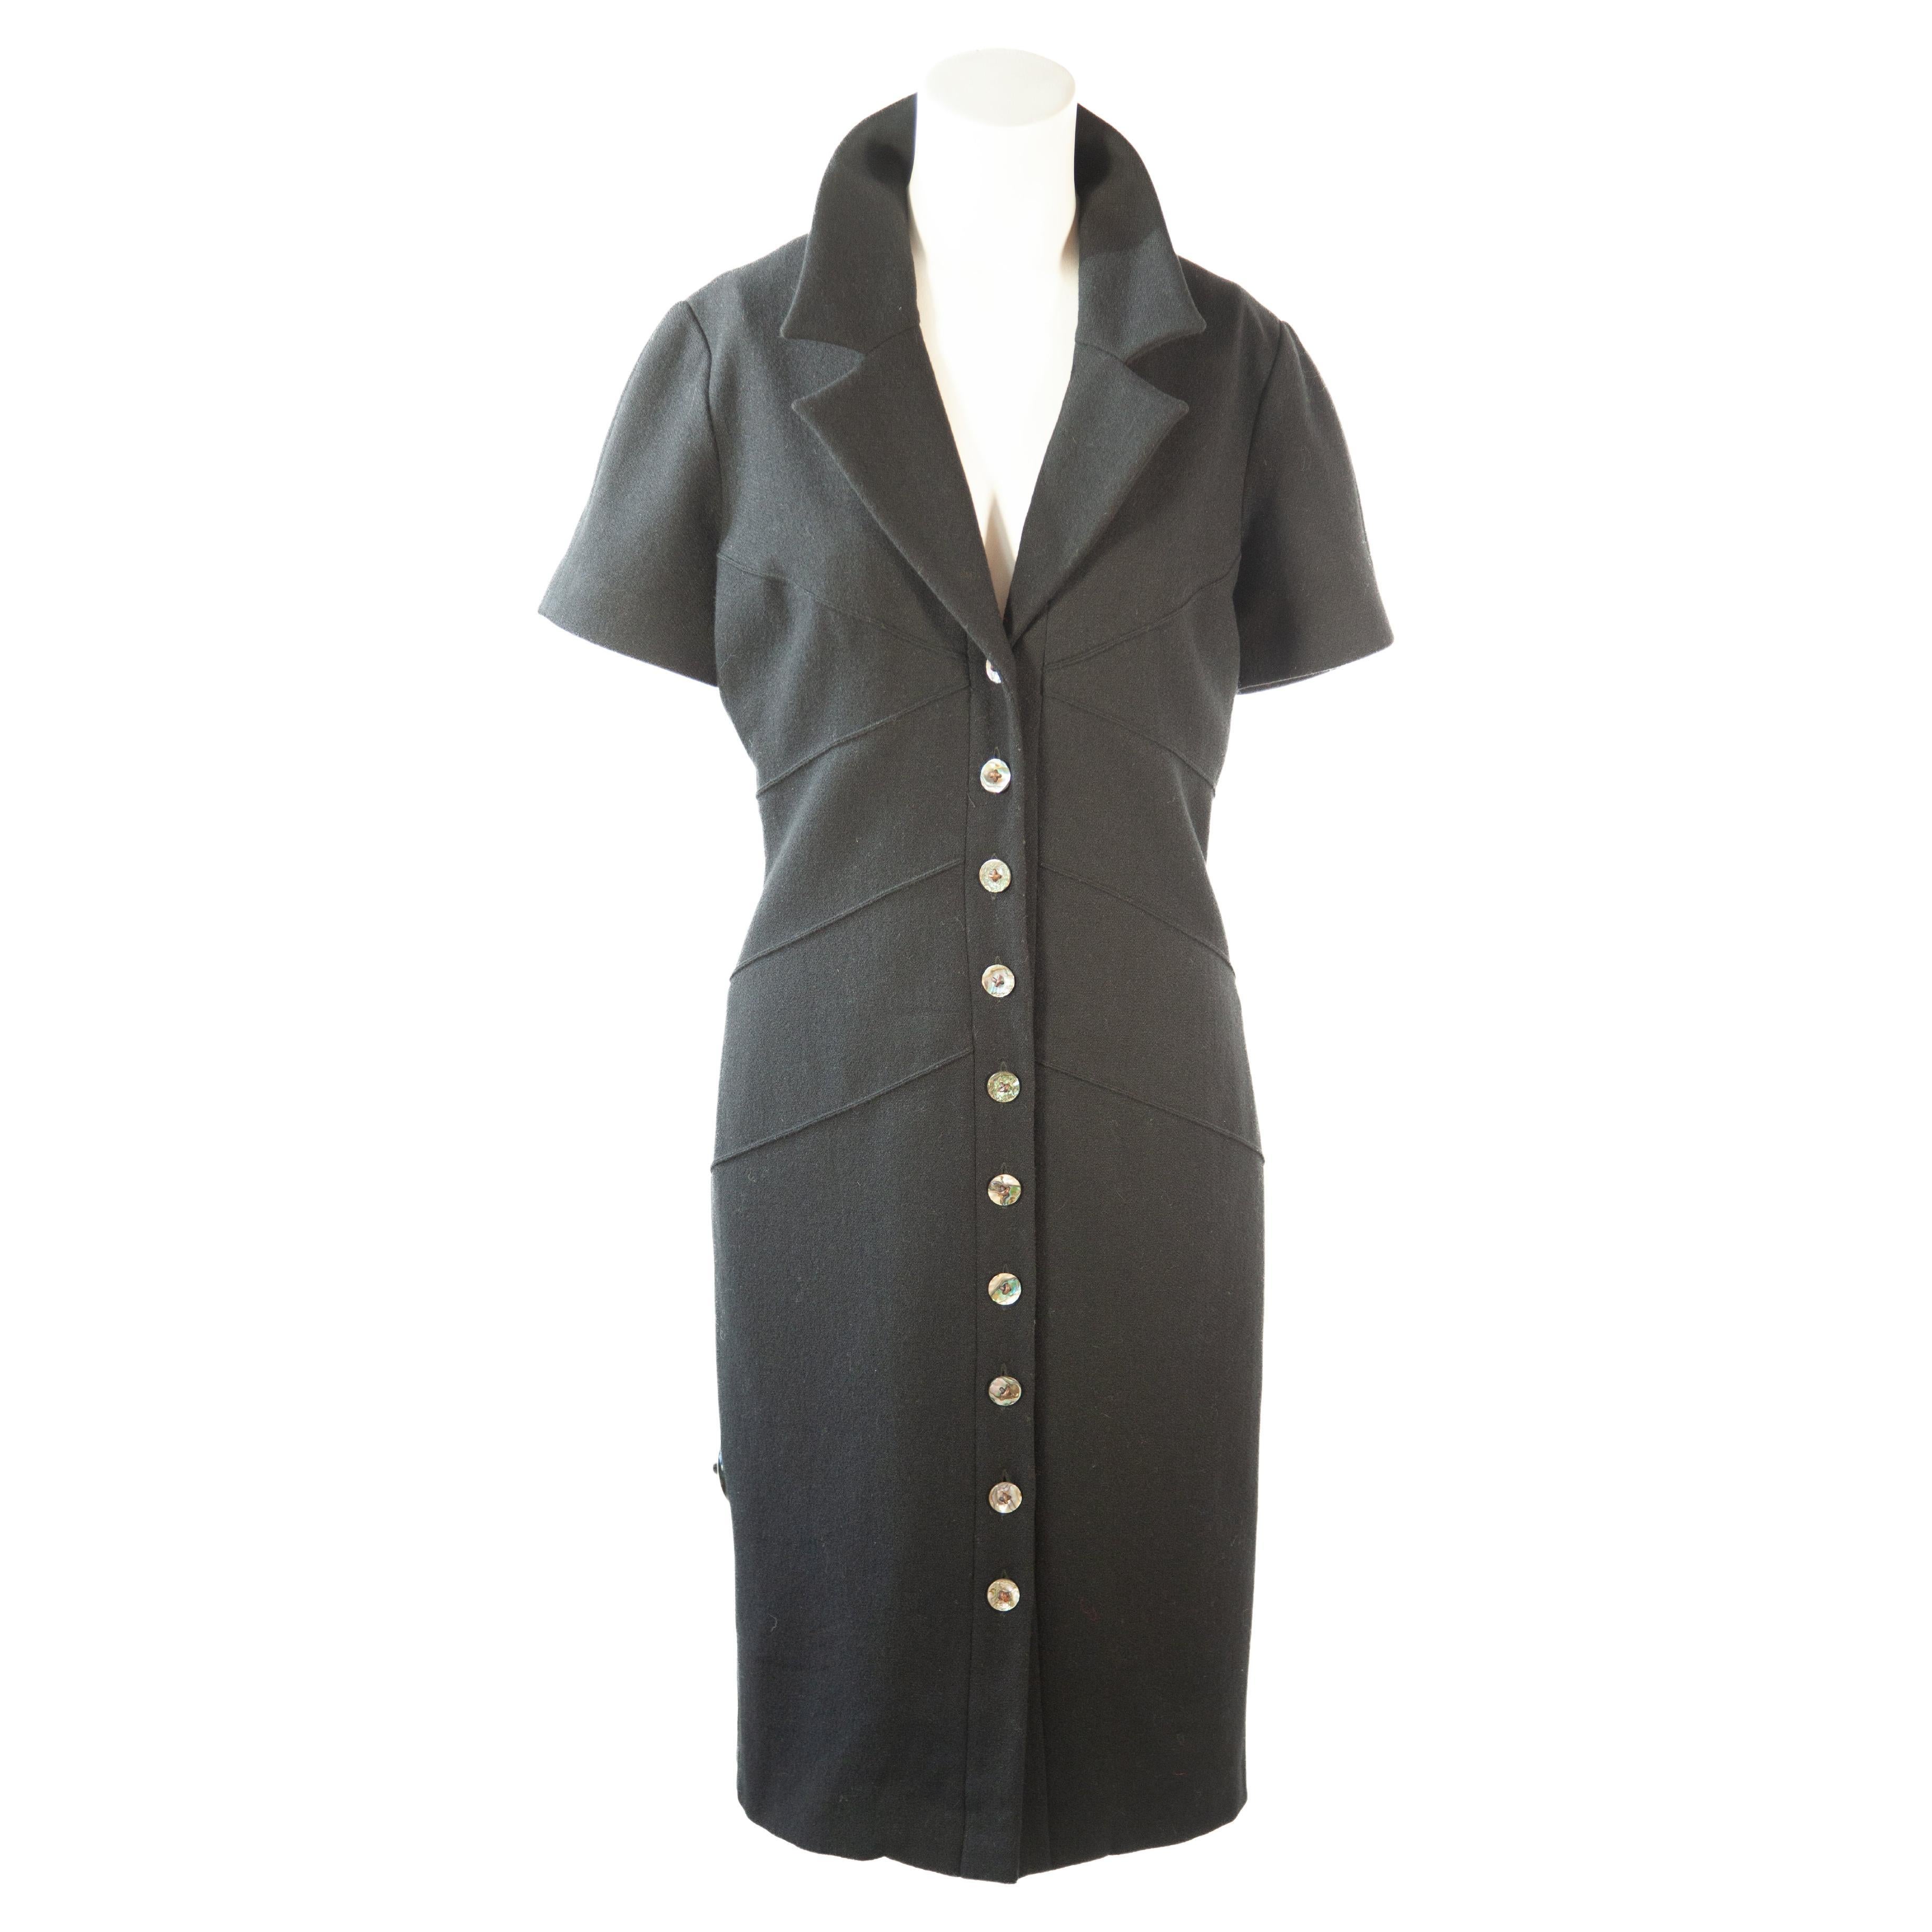 Fendi wool long dress with collar, short sleeves and abalone and leather buttons.